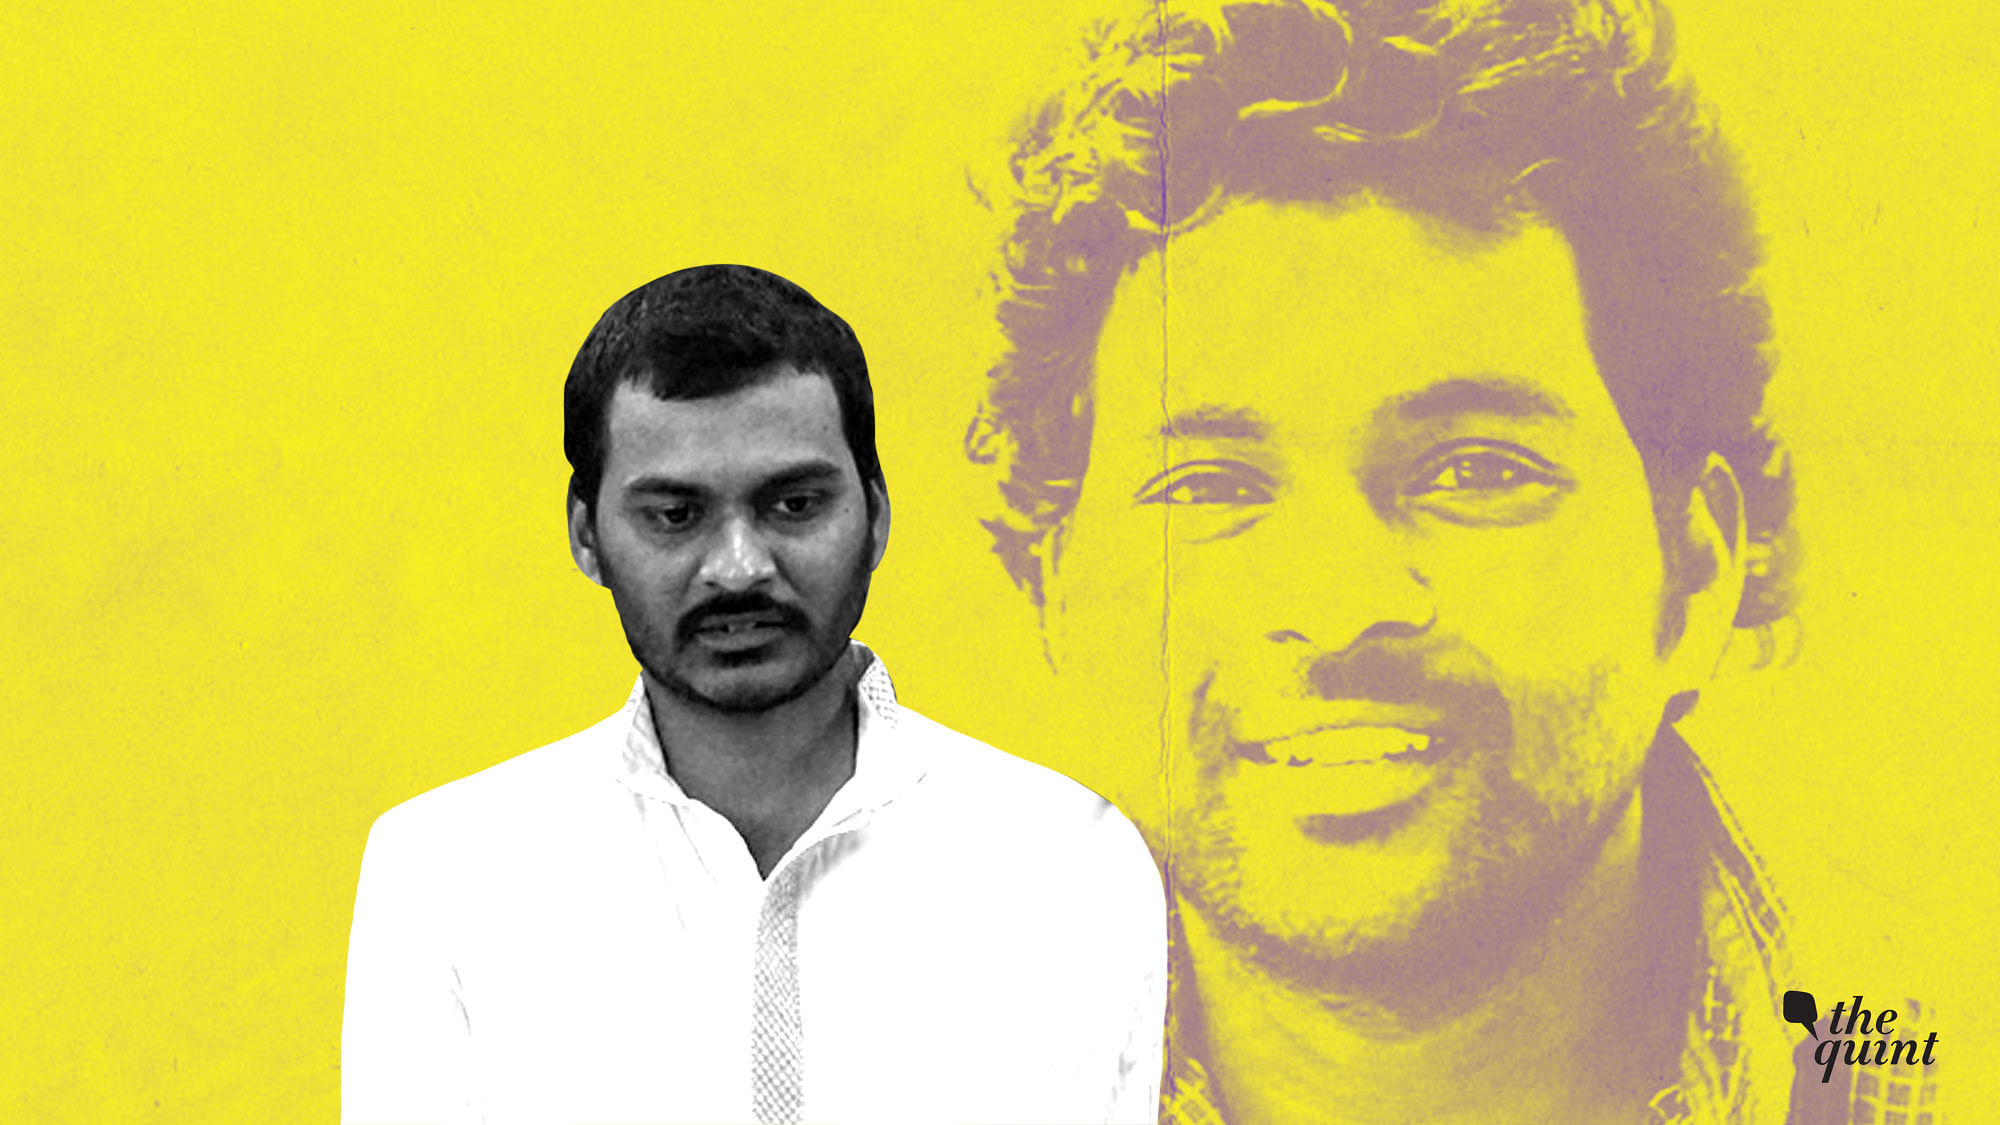 Dalit PhD scholar and Rohith Vemula took his own life on 16 January 2016. On the third anniversary of Rohith’s death, <b>The Quint</b> spoke to Rohith’s younger brother, Raja Vemula.